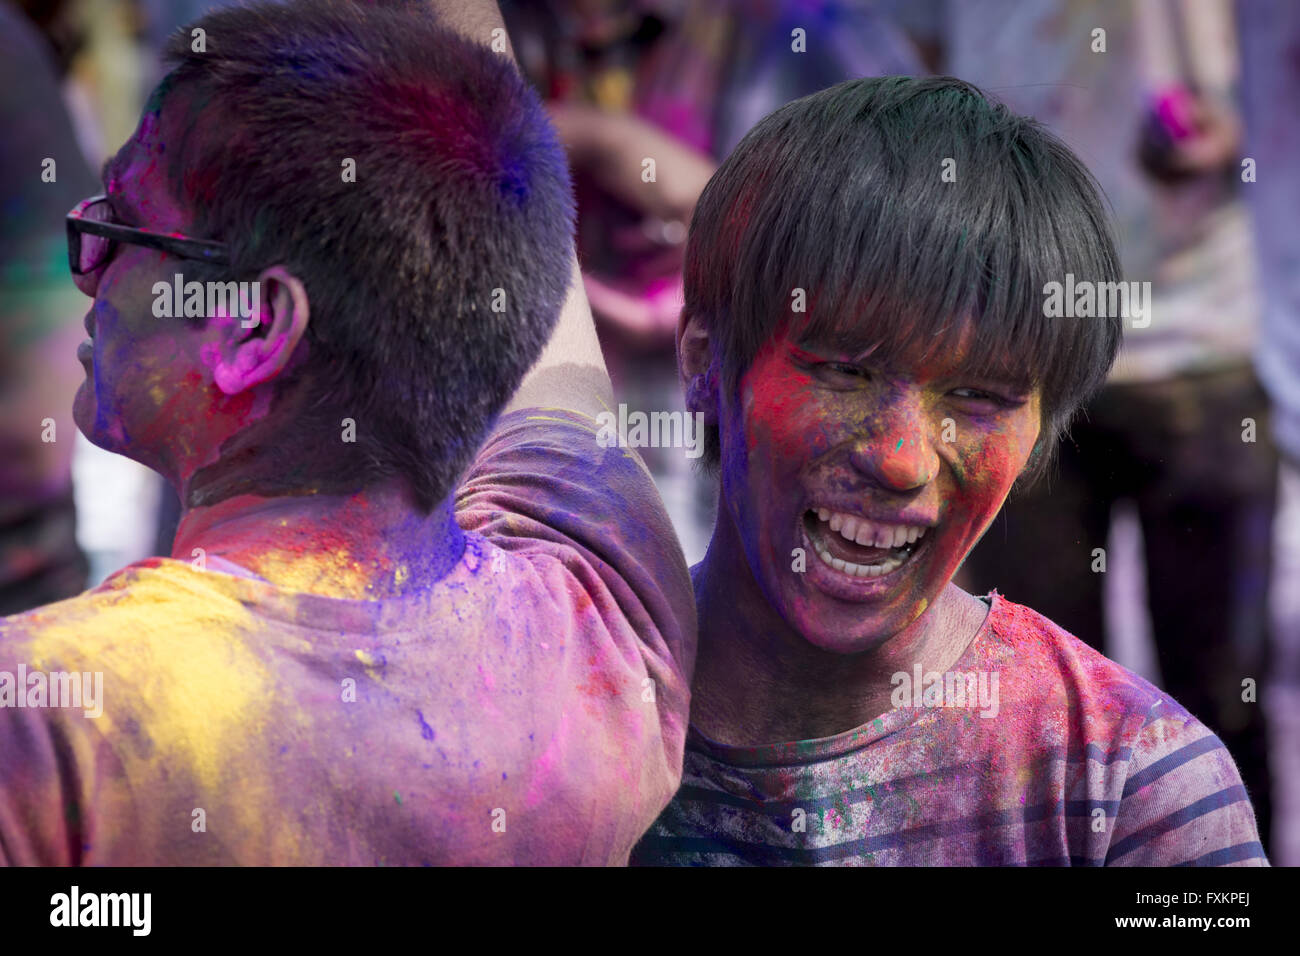 Yokohama, Japan. 16th April, 2016. This is the 4th Holi Festival in Yokohama. It is a famous spring Indian Festival, not religious, where the people paint each other the body using the color powder. The many young people gatherd to meet other people and celebrate the coming of Spring. India–Japan relations have traditionally been strong. For centuries, the people of India and Japan have engaged in cultural exchanges, primarily as a result of Buddhism which spread indirectly from India to Japan, via China and Korea. Credit:  PACIFIC PRESS/Alamy Live News Stock Photo